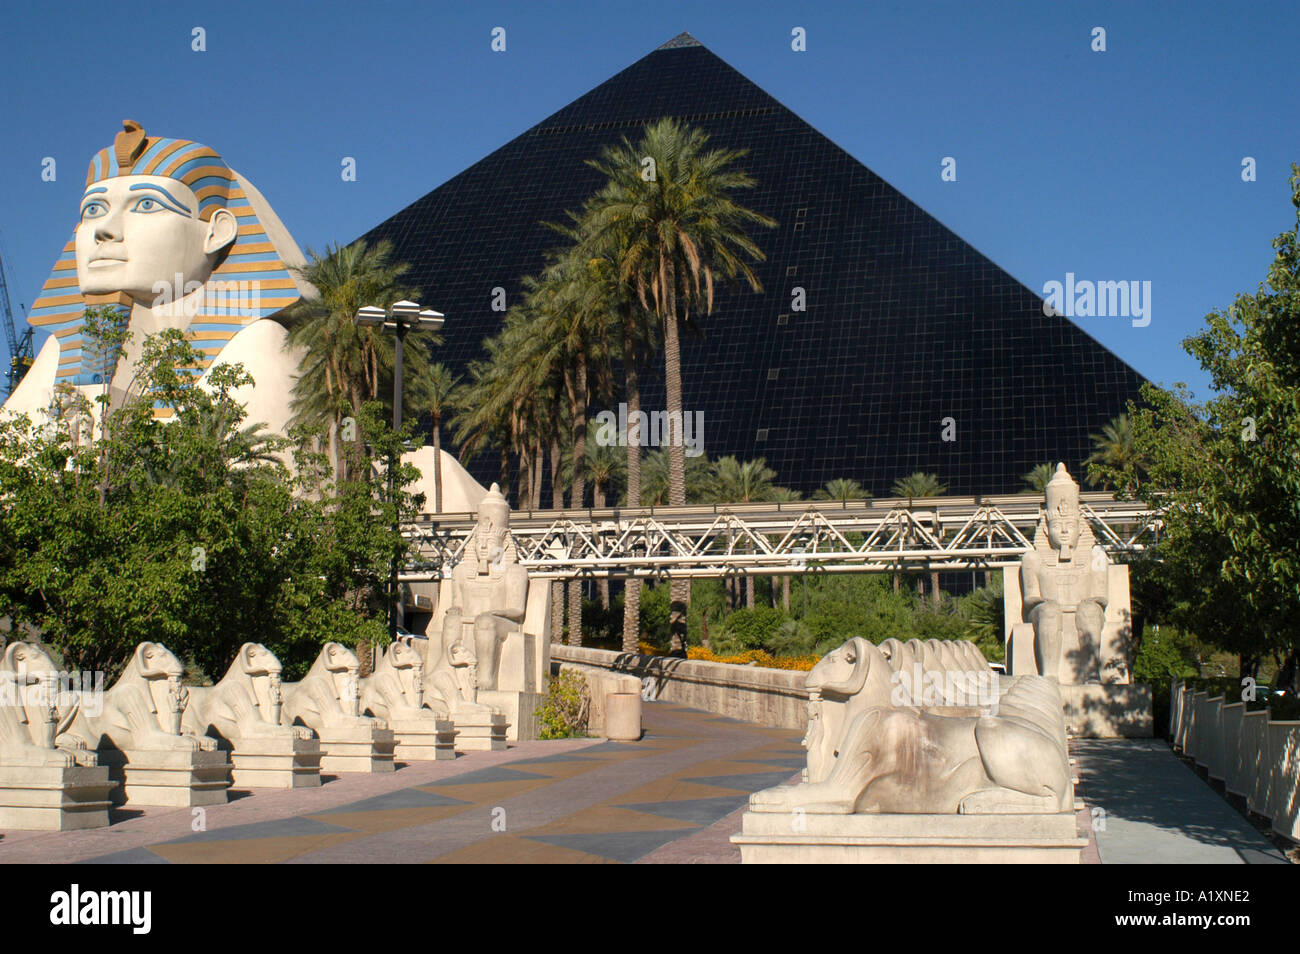 The pyramid sphinx and statue palm tree lined path at the Luxor Hotel Casino based on an Ancient Egyptian theme Stock Photo